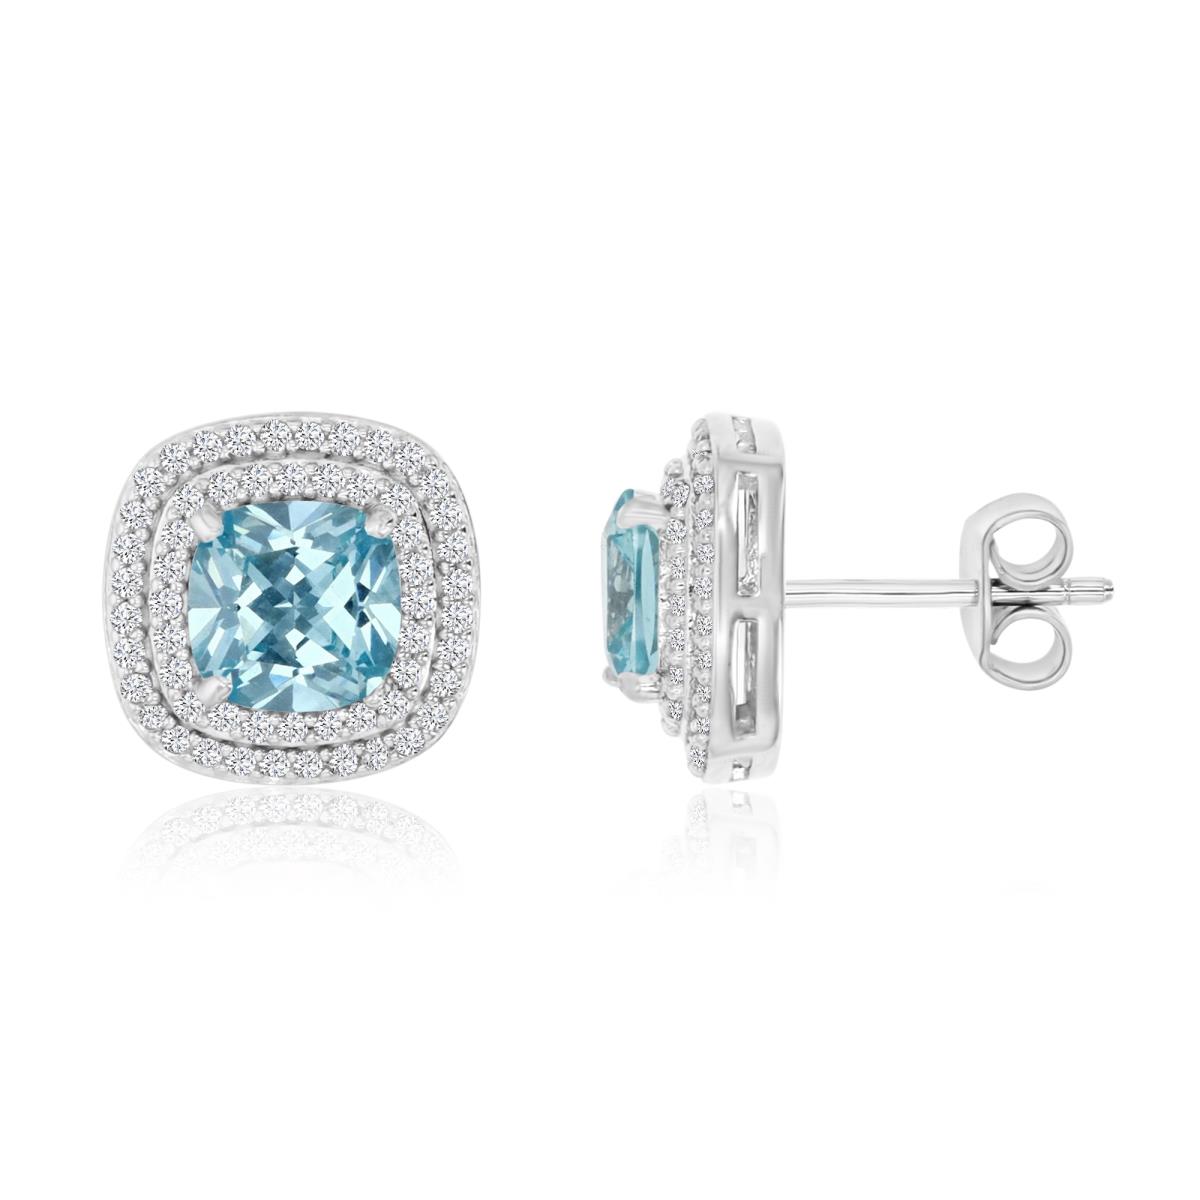 Sterling Silver 7mm Cushion Light Blue & White CZ Pave Stud Earring